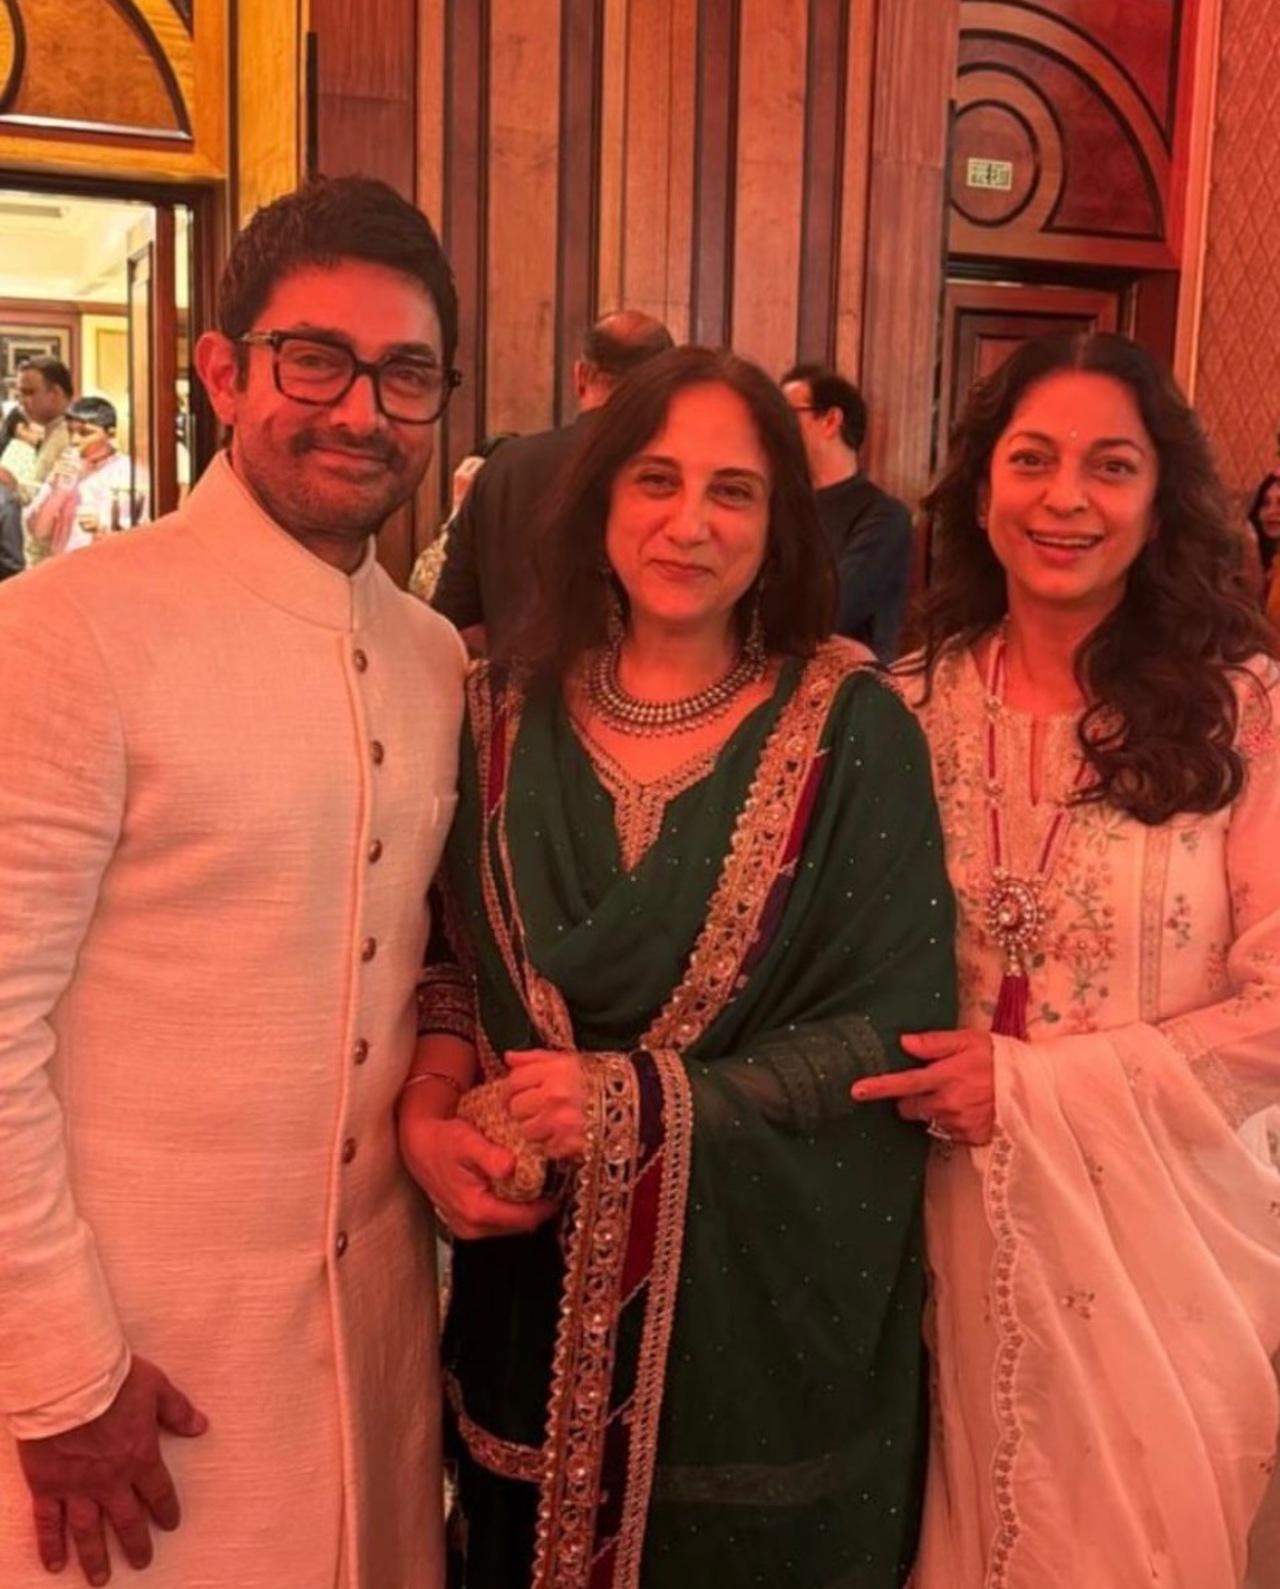 Actress Juhi Chawla was also a part of the celebration. The actress has previously worked with Aamir Khan in multiple films and the two share a great bond